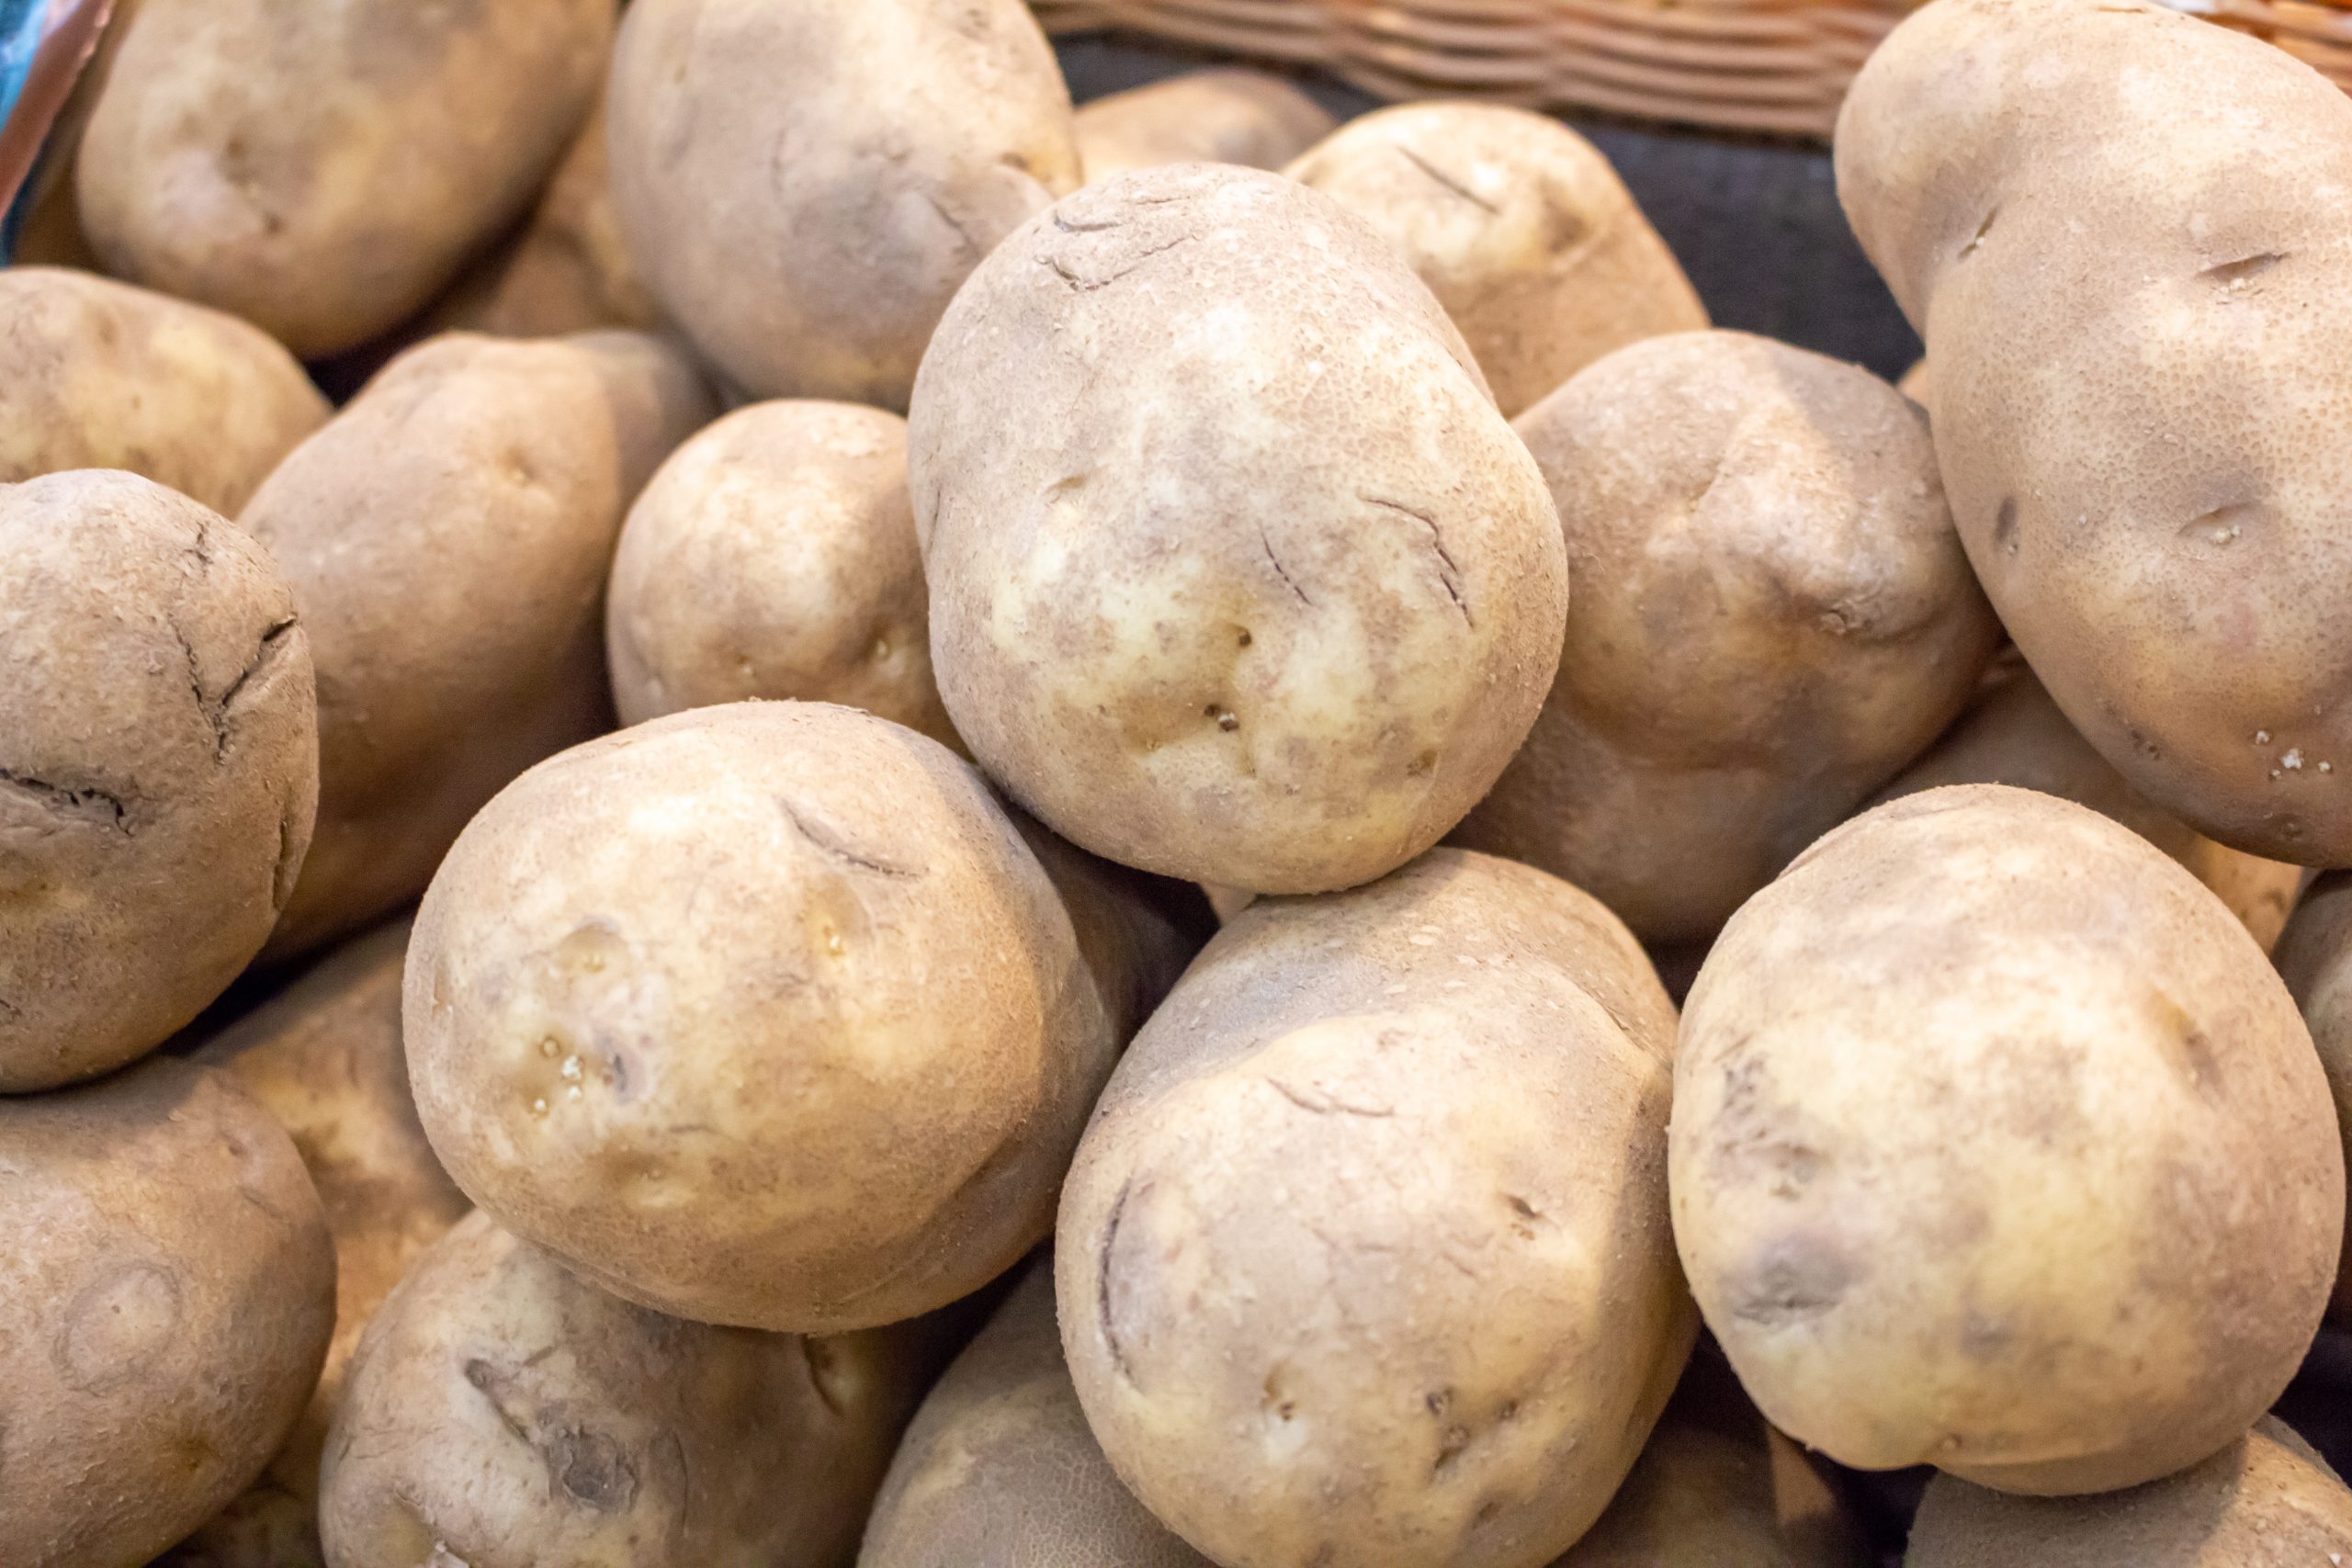 Several units of Russet potatoes.